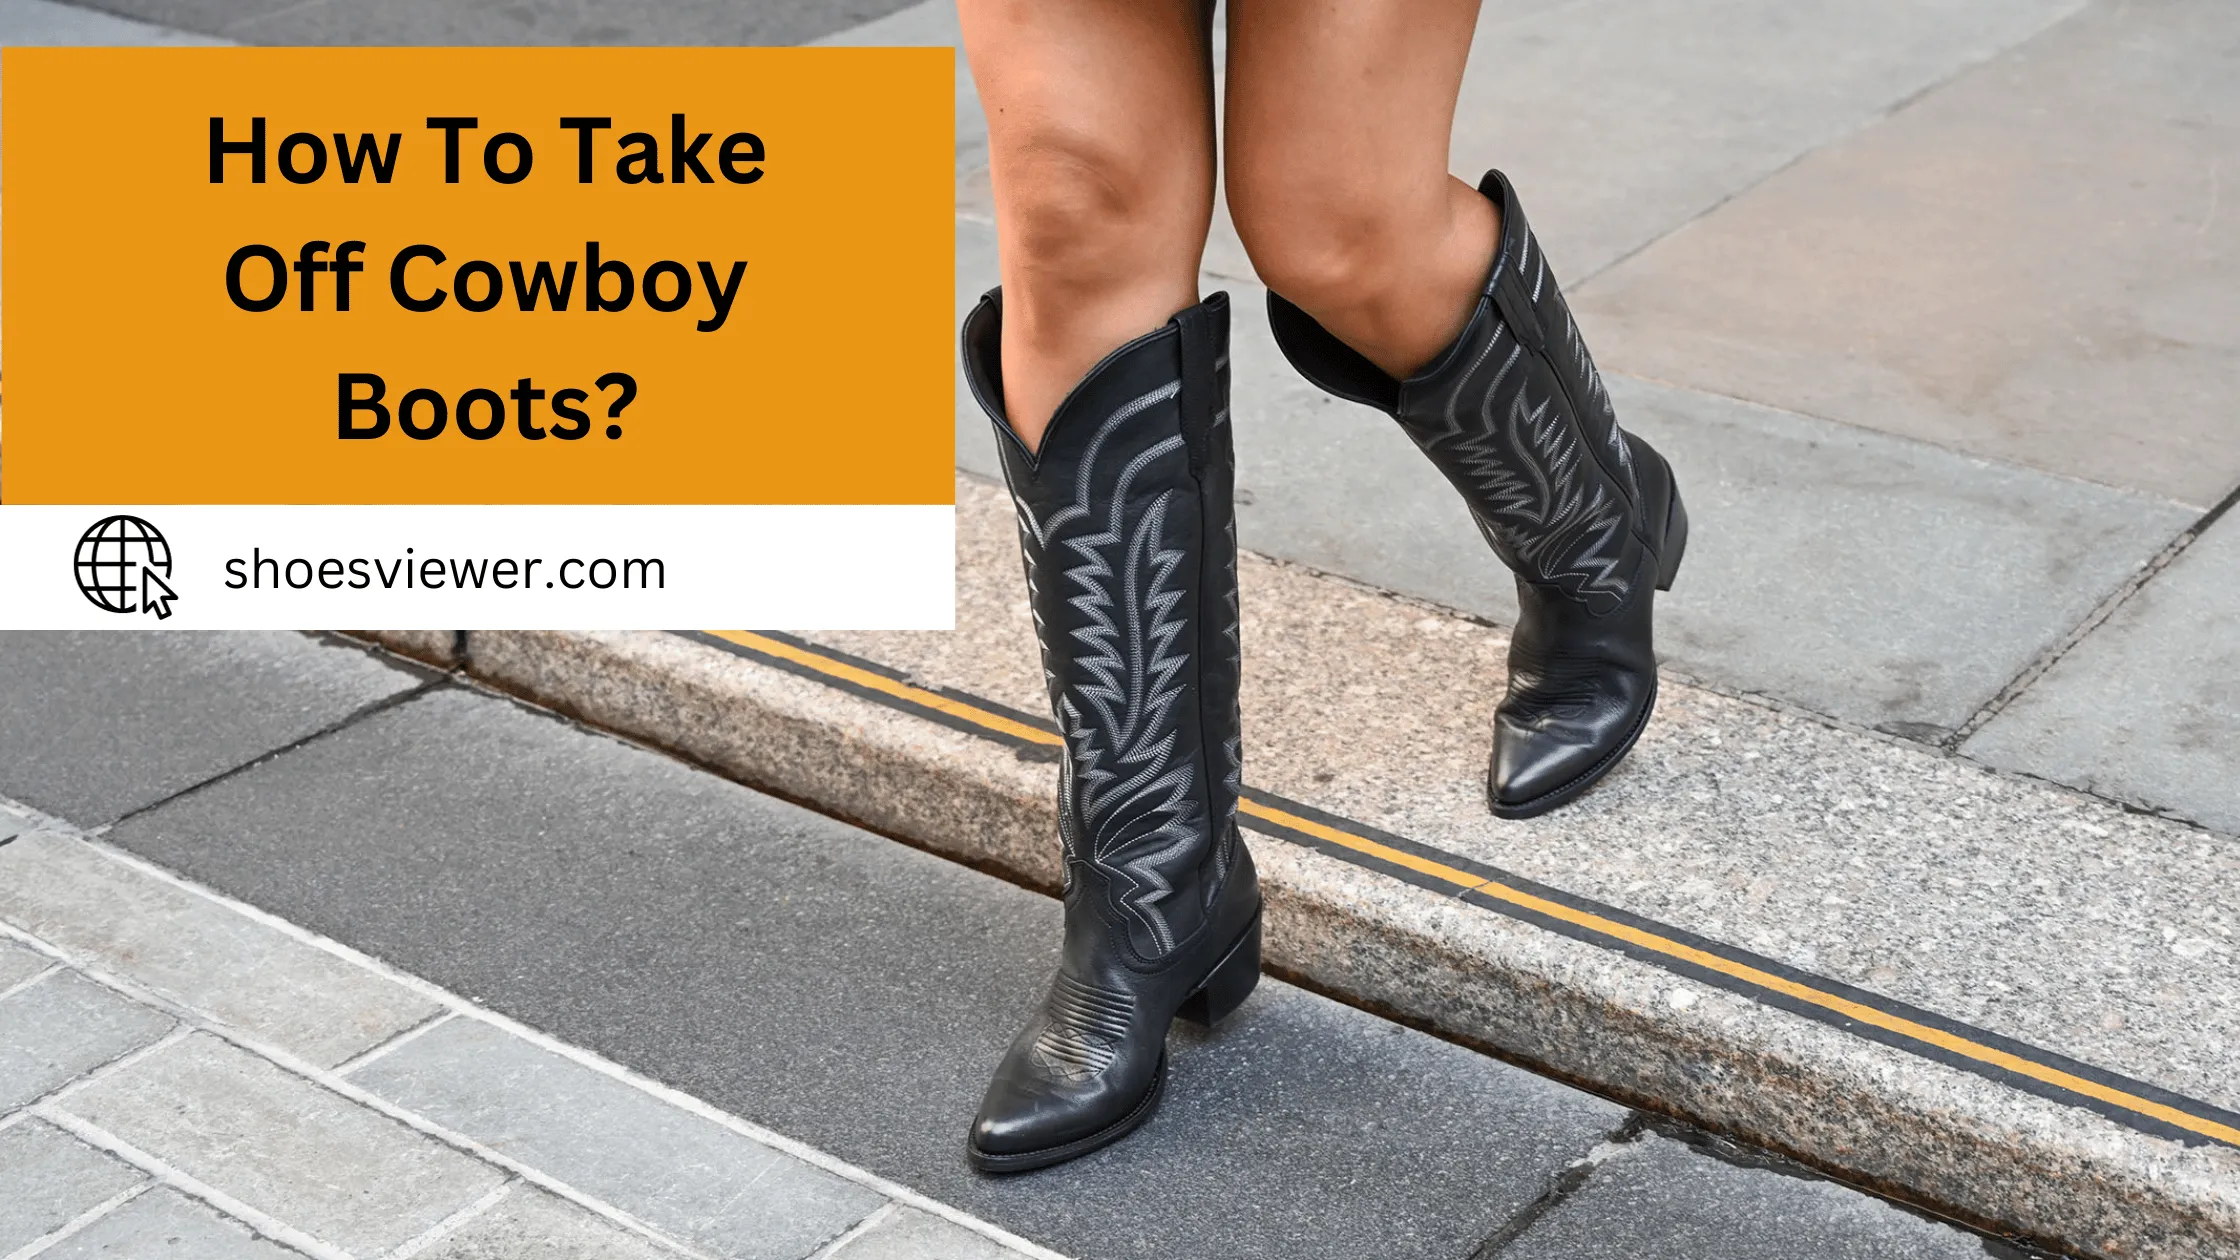 How To Take Off Cowboy Boots? Quick & Easy Ways